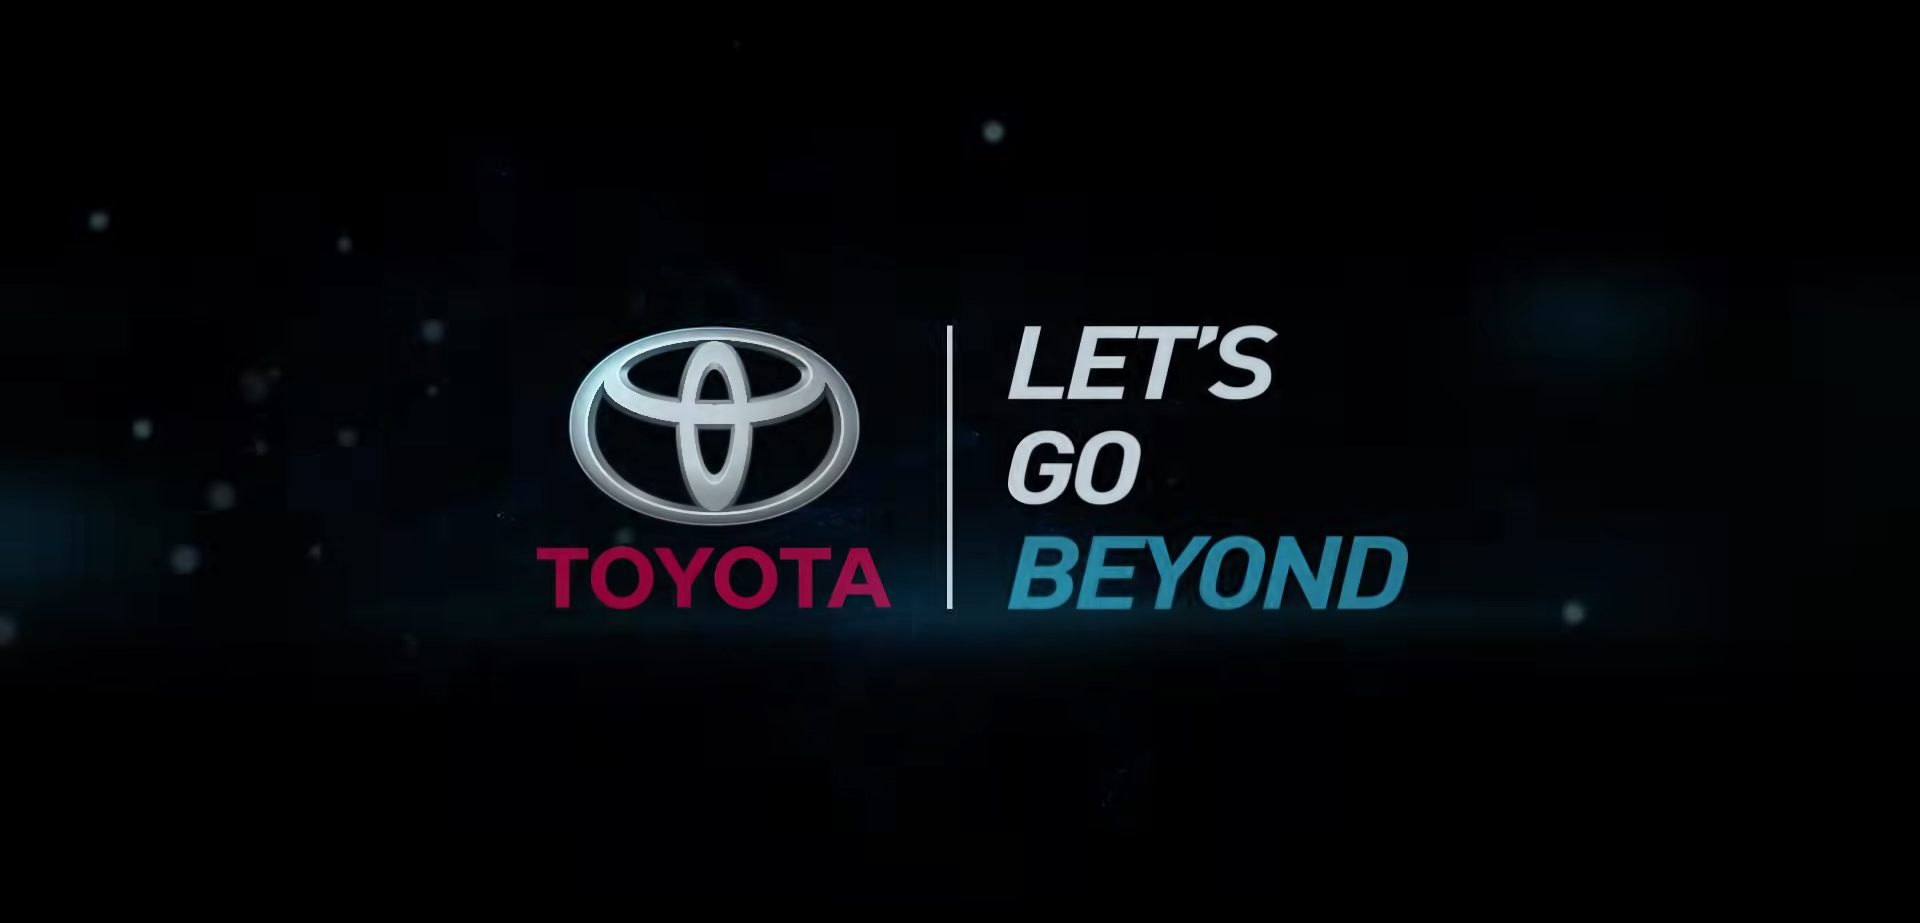 TOYOTA LET'S GO BEYOND